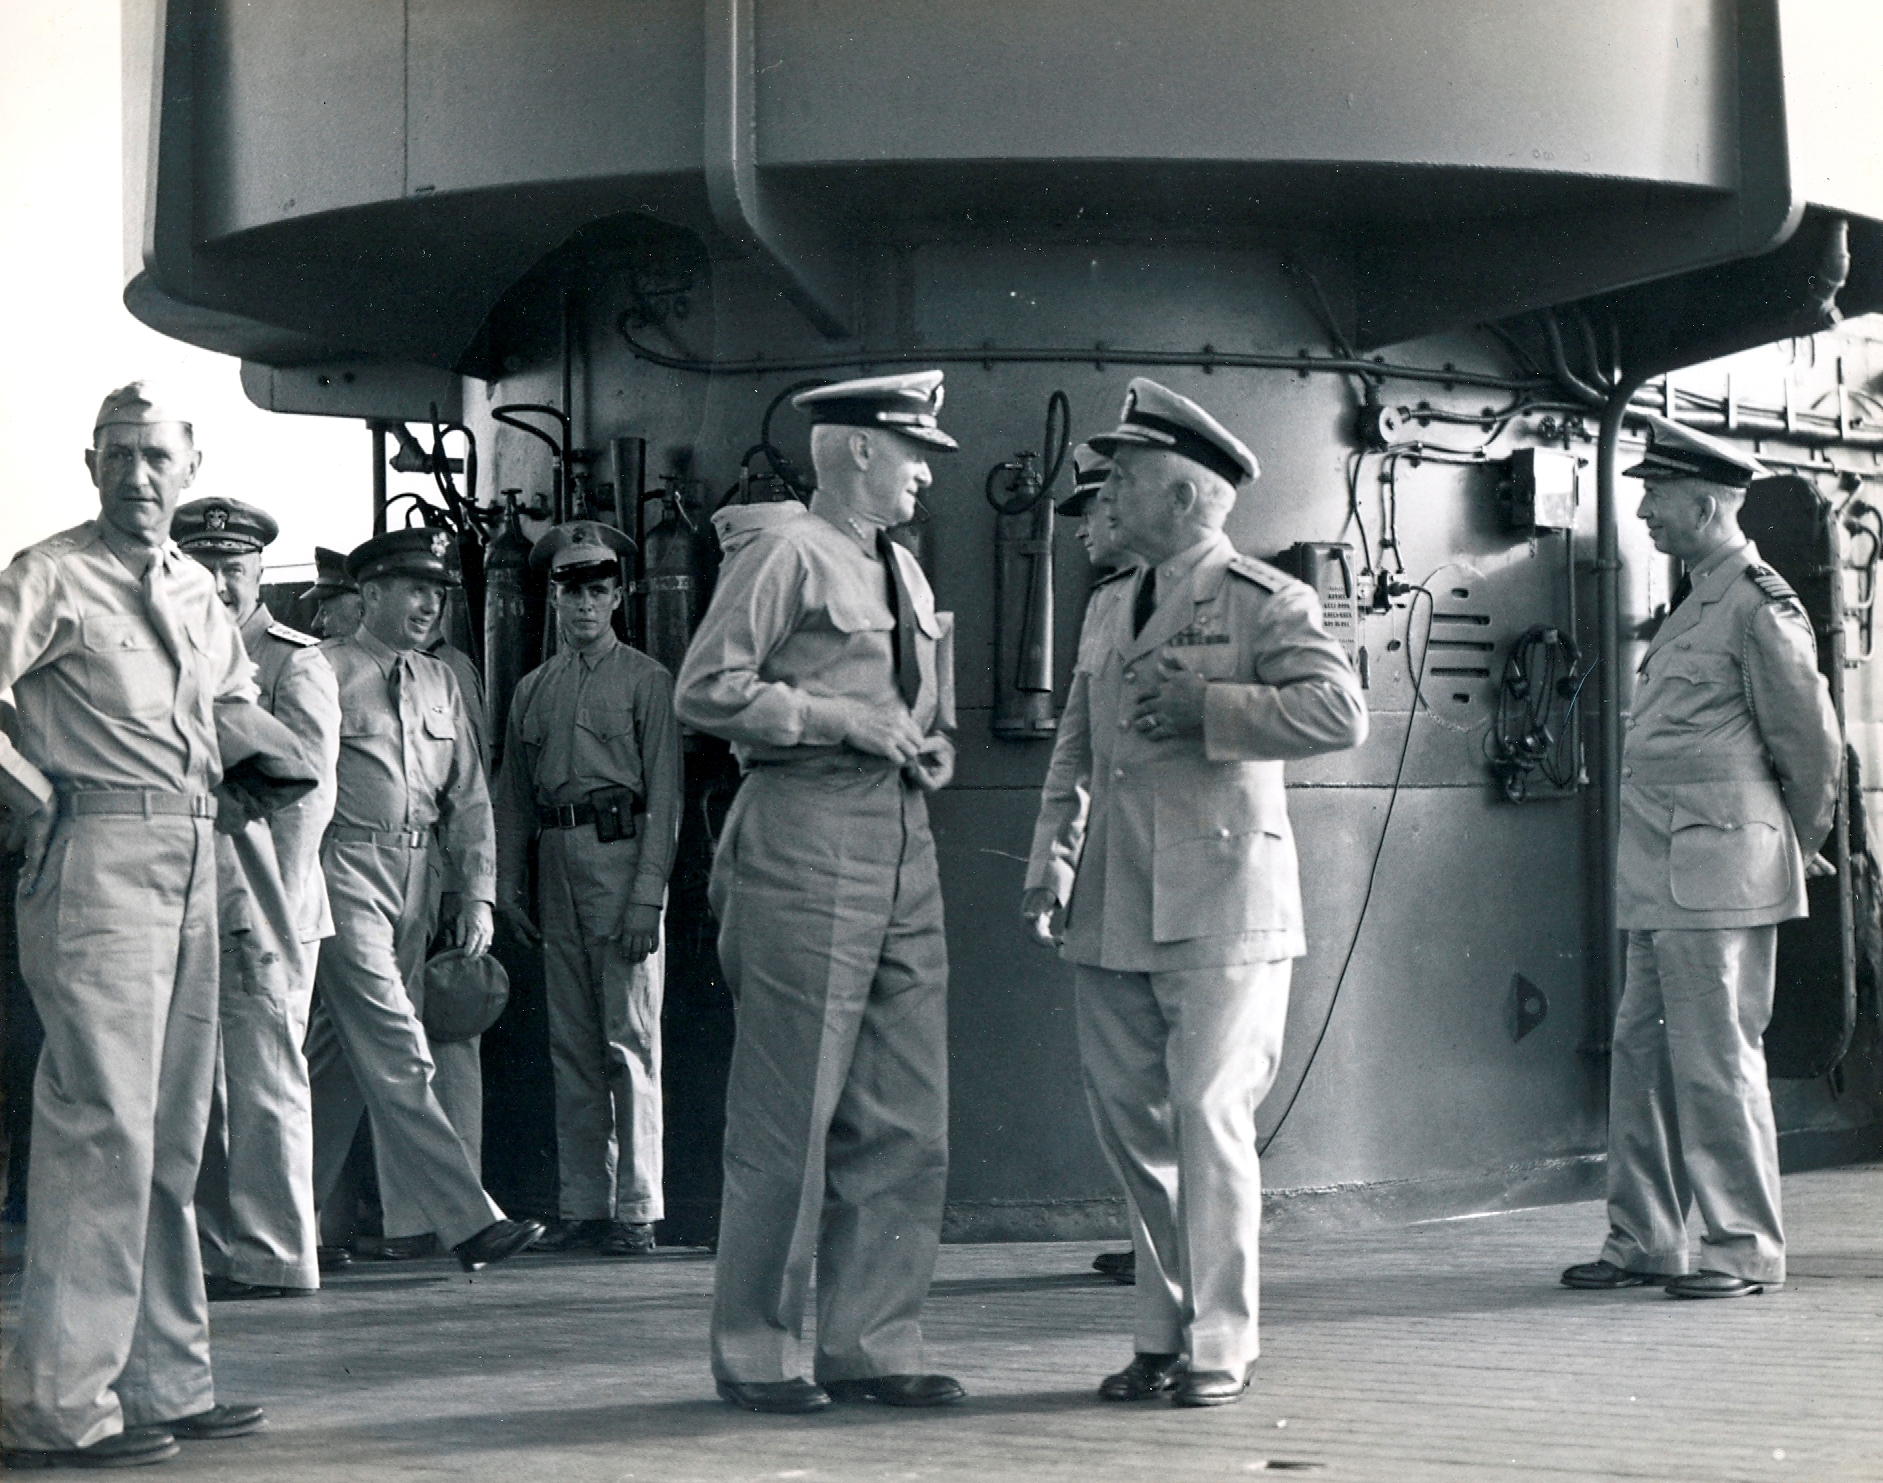 United States Navy Admiral Chester Nimitz, left center, speaking to Rear Admiral Aubrey Fitch on the flight deck of USS Saratoga at Pearl Harbor while an Army Major General, far left, looks on, circa 1942.